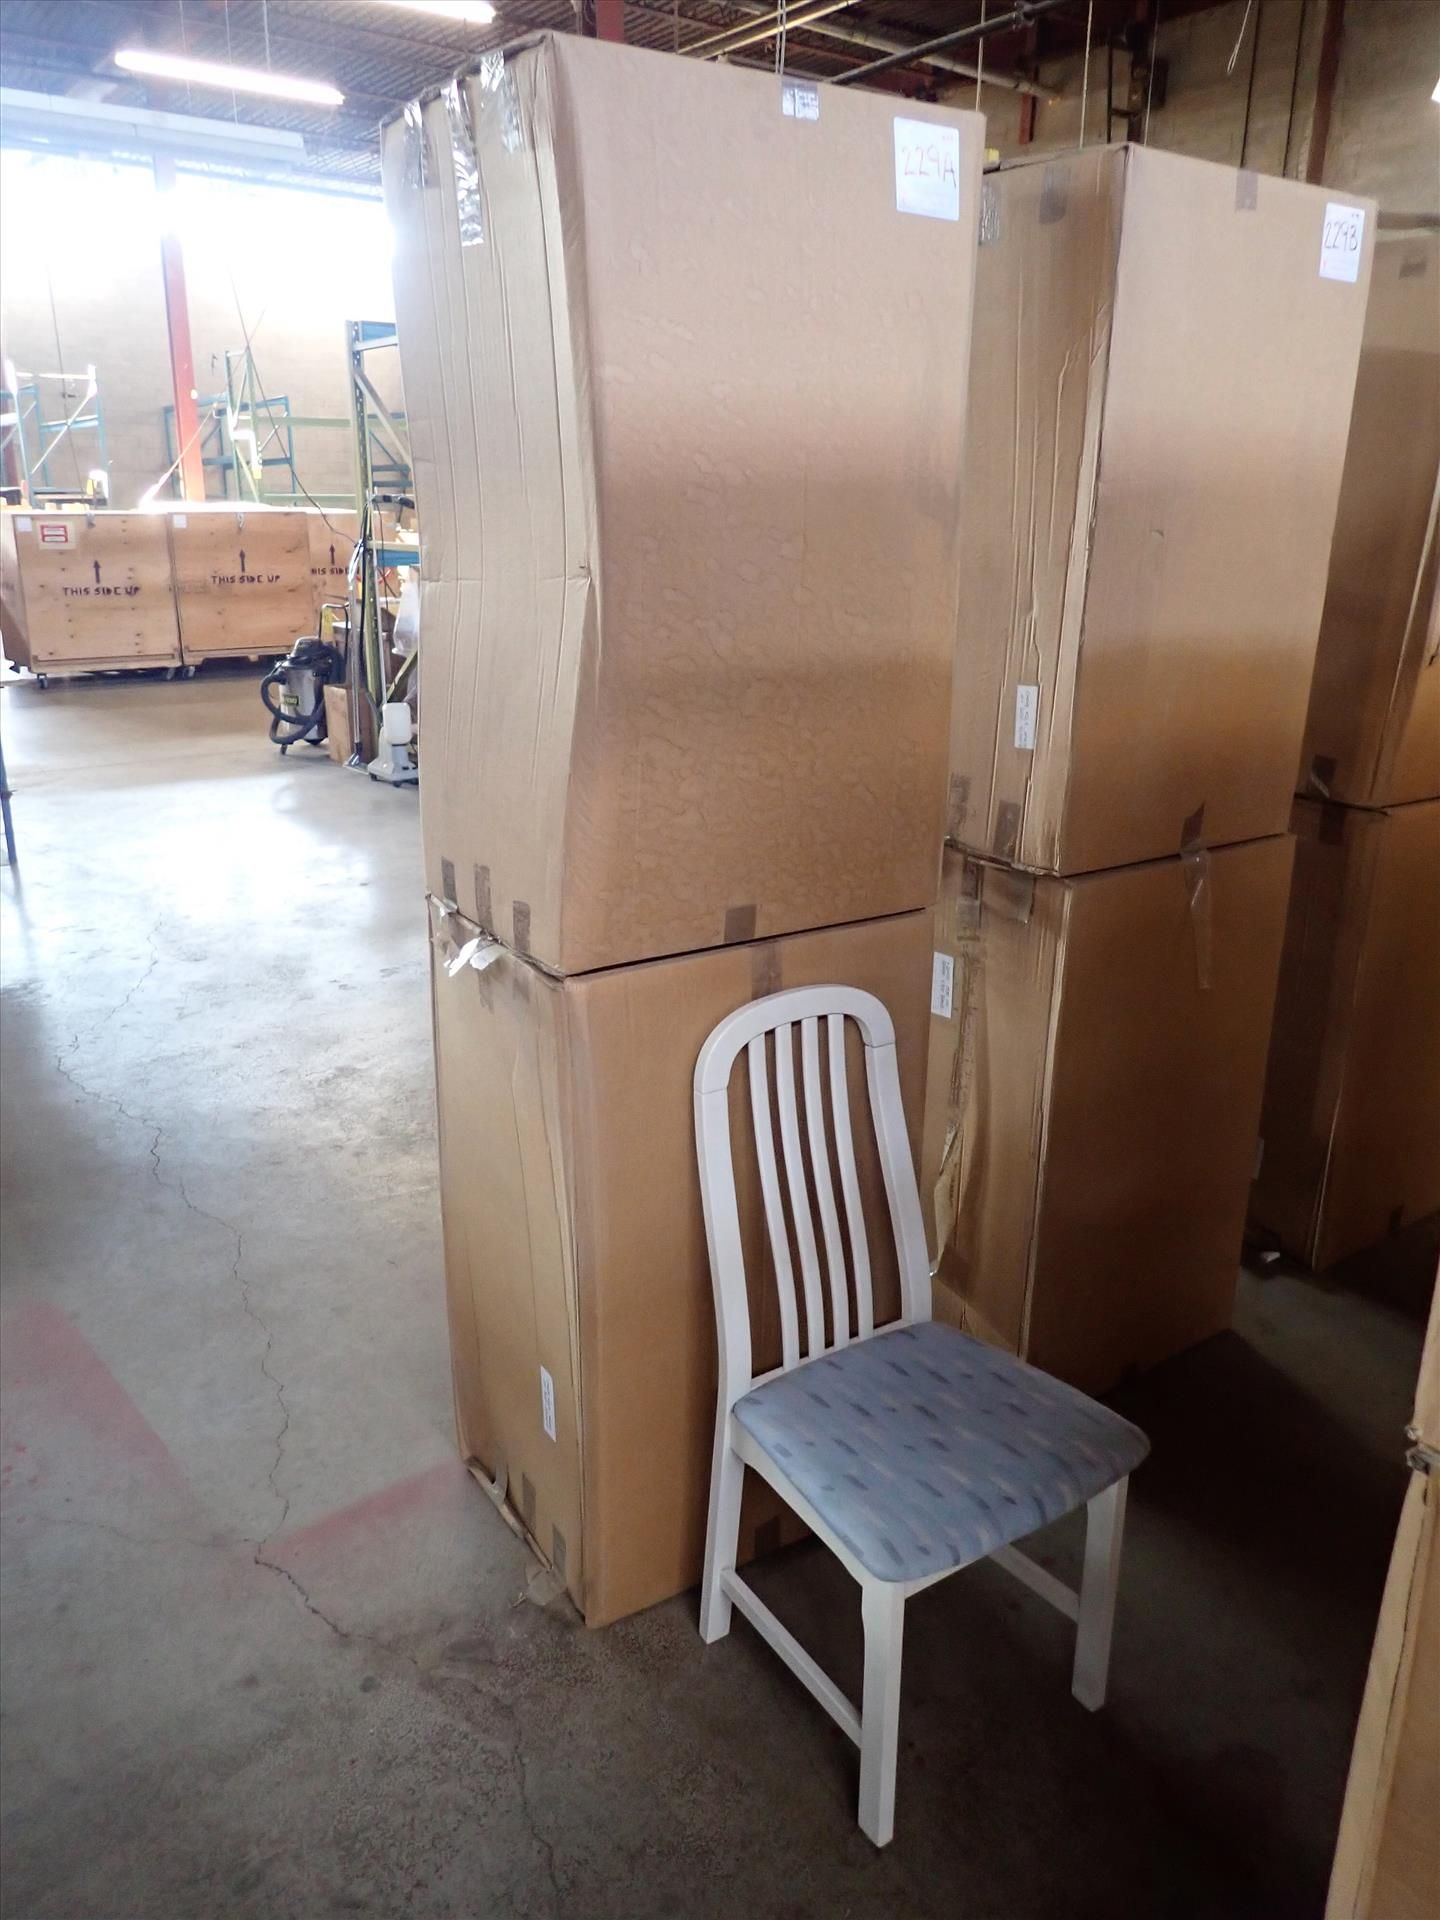 (4) Koln dinning chairs (NEW in box), white lacquered finish, stain-resistant commercial-grade - Image 2 of 2